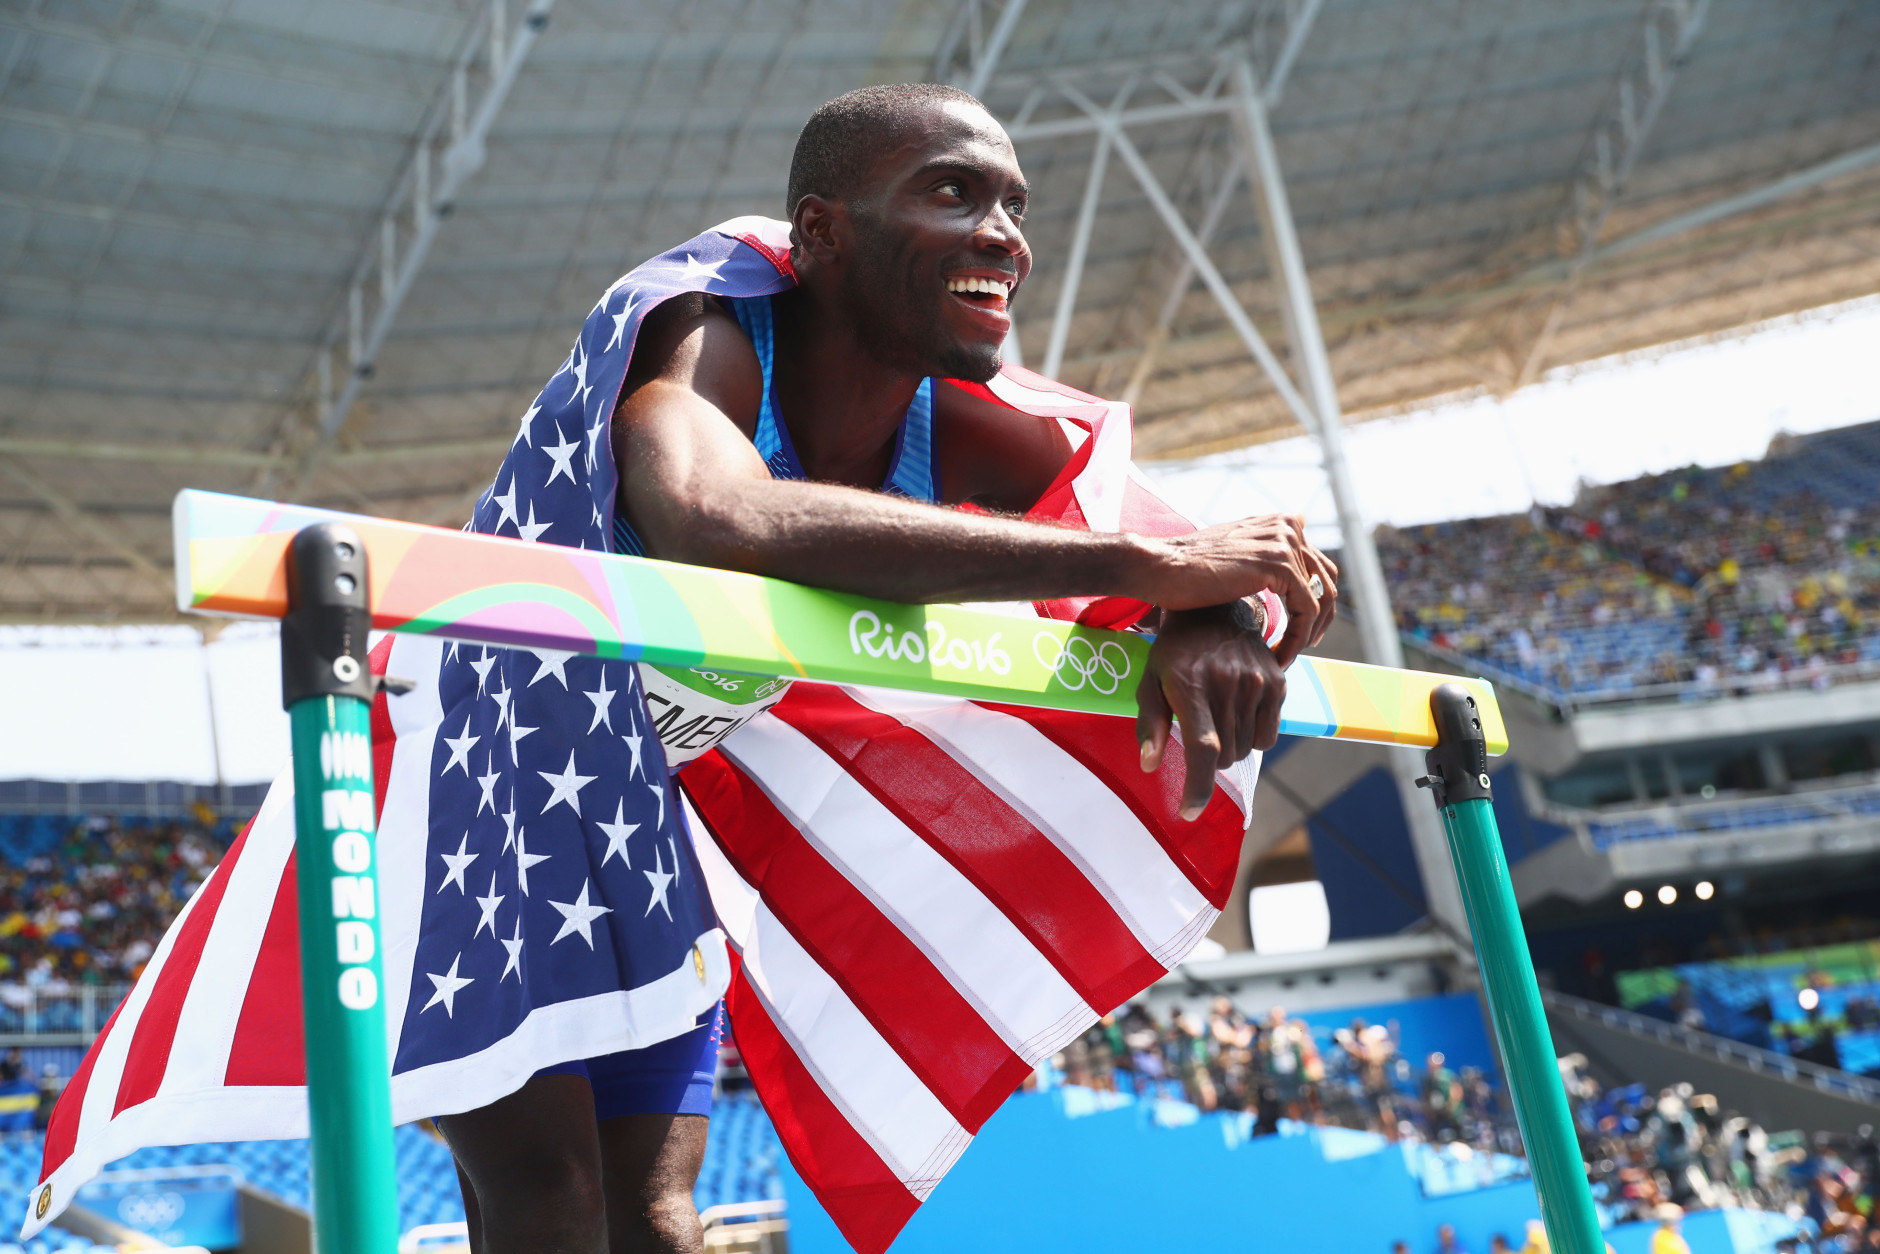 RIO DE JANEIRO, BRAZIL - AUGUST 18:  Kerron Clement of the United States celebrates after placing first in the Men's 400m Hurdles Final on Day 13 of the Rio 2016 Olympic Games at the Olympic Stadium on August 18, 2016 in Rio de Janeiro, Brazil.  (Photo by Alexander Hassenstein/Getty Images)